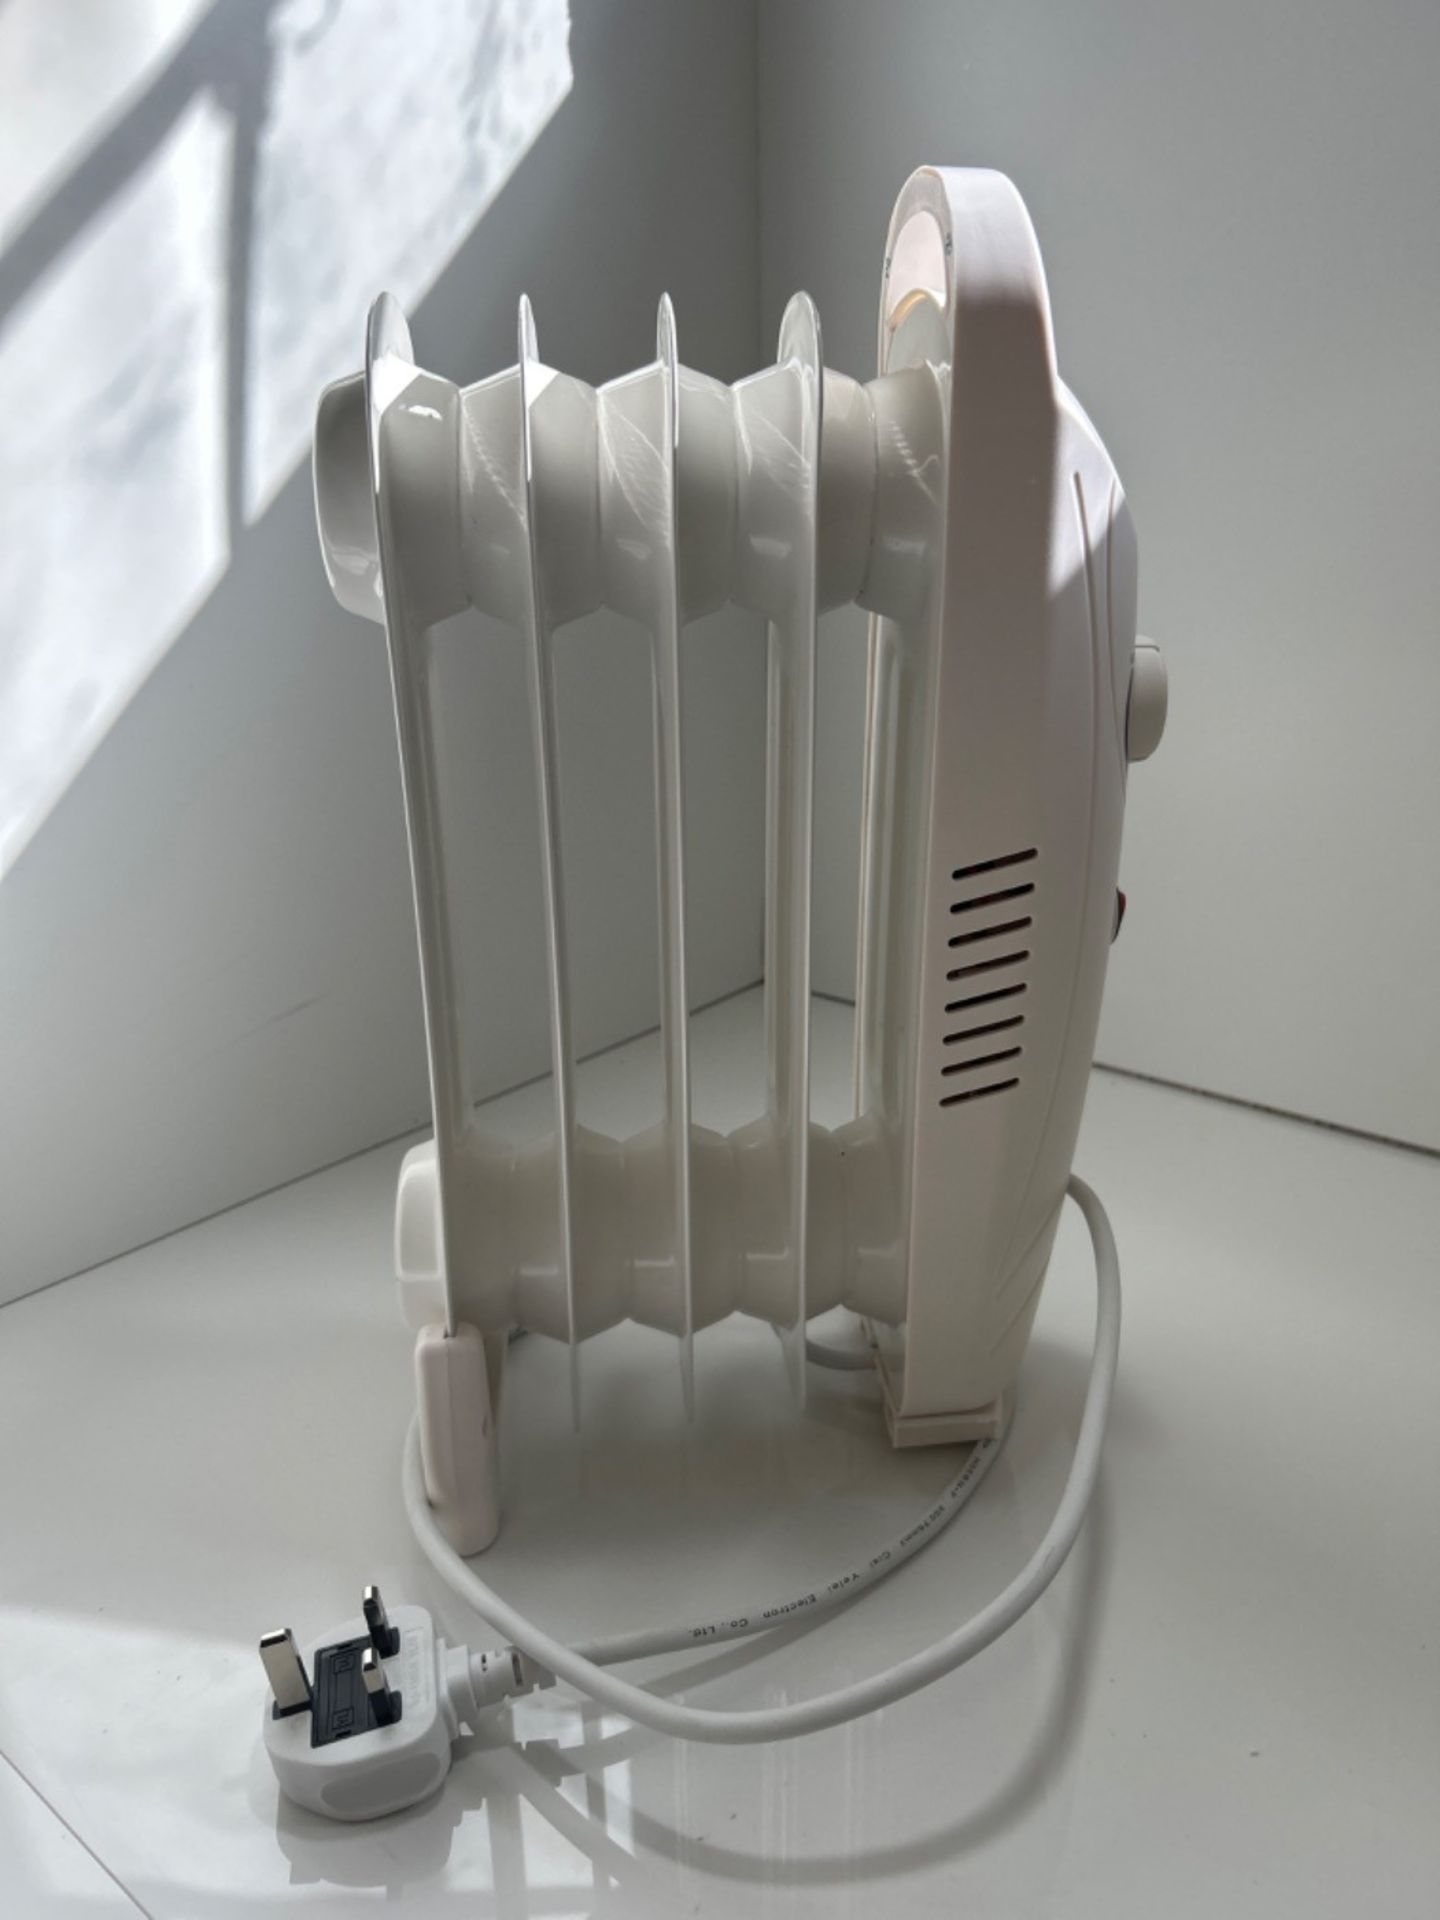 Russell Hobbs 650W Oil Filled Radiator, 5 Fin Portable Electric Heater - White, Adjustable Thermo... - Image 2 of 3